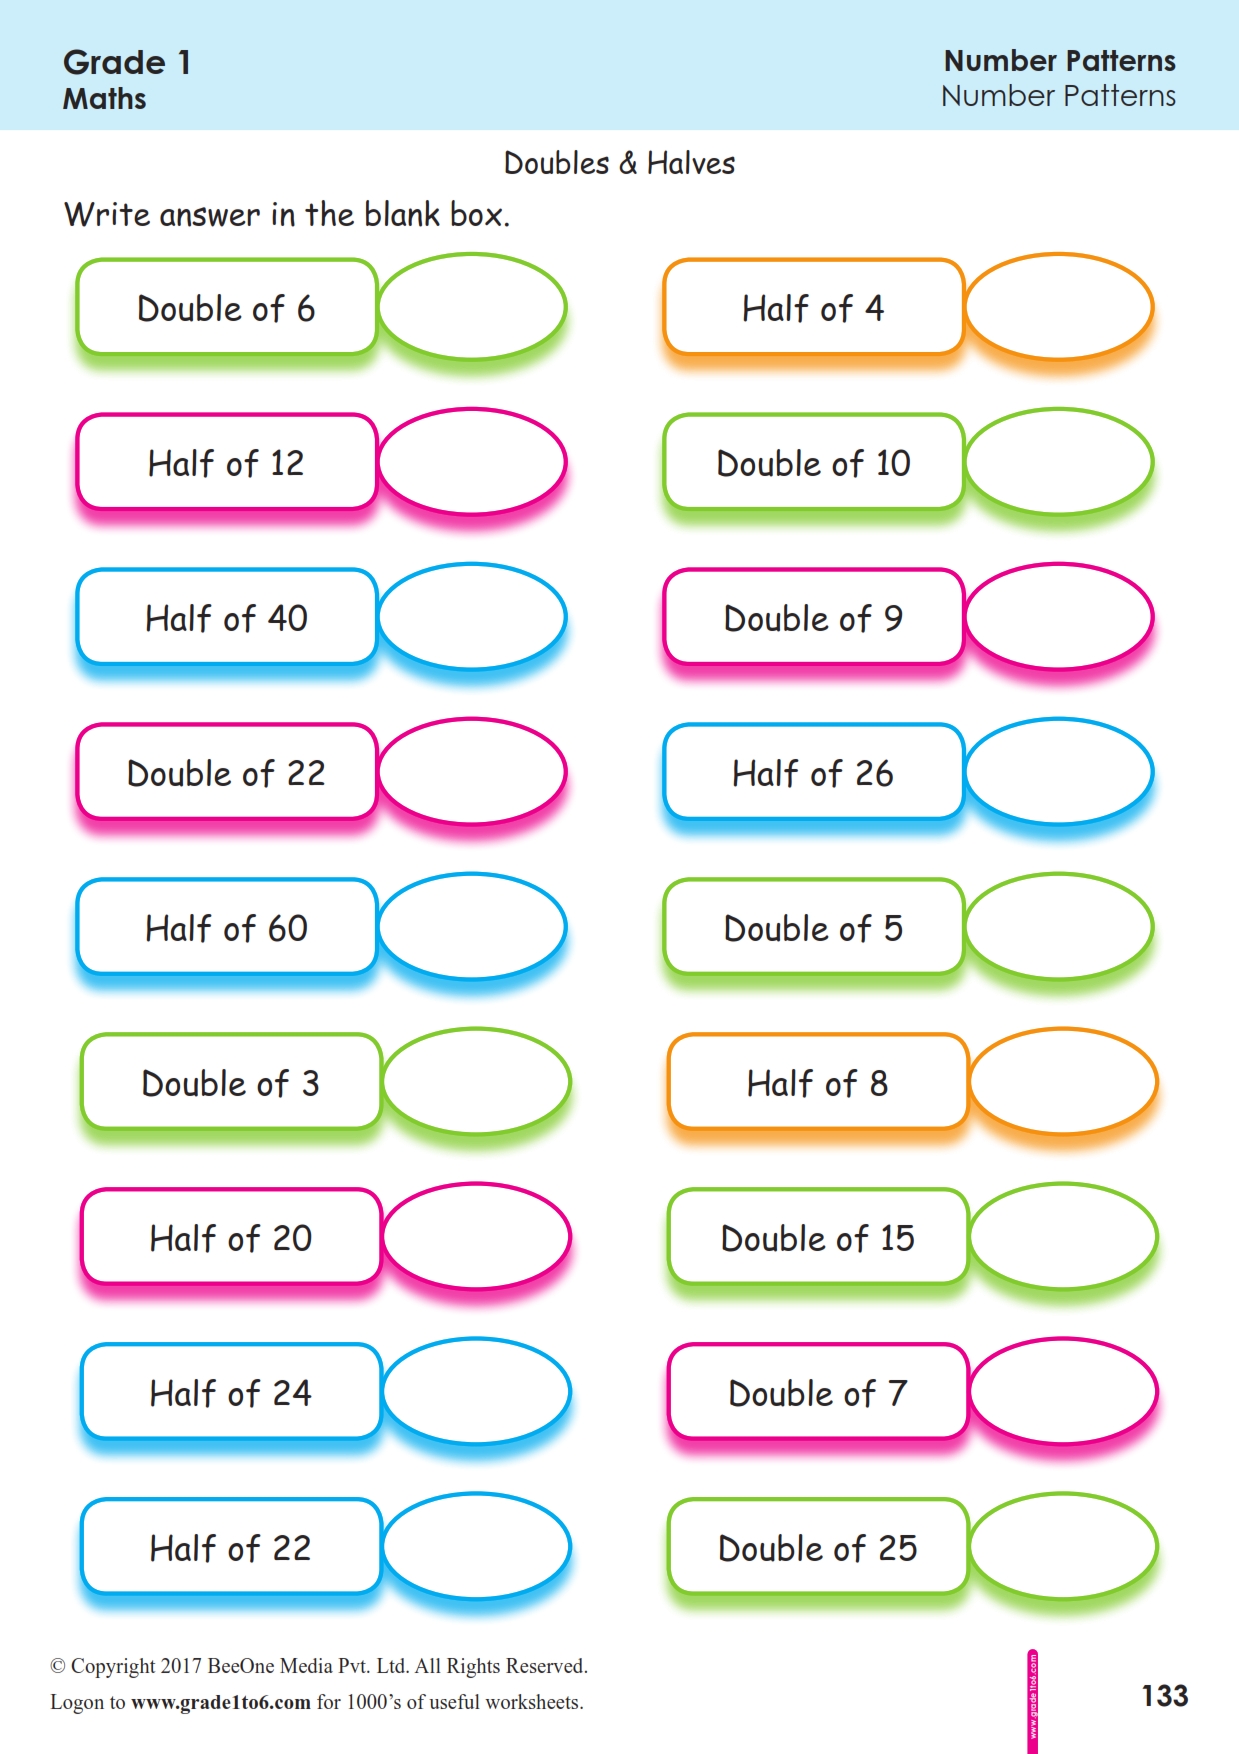 doubling-and-halving-worksheets